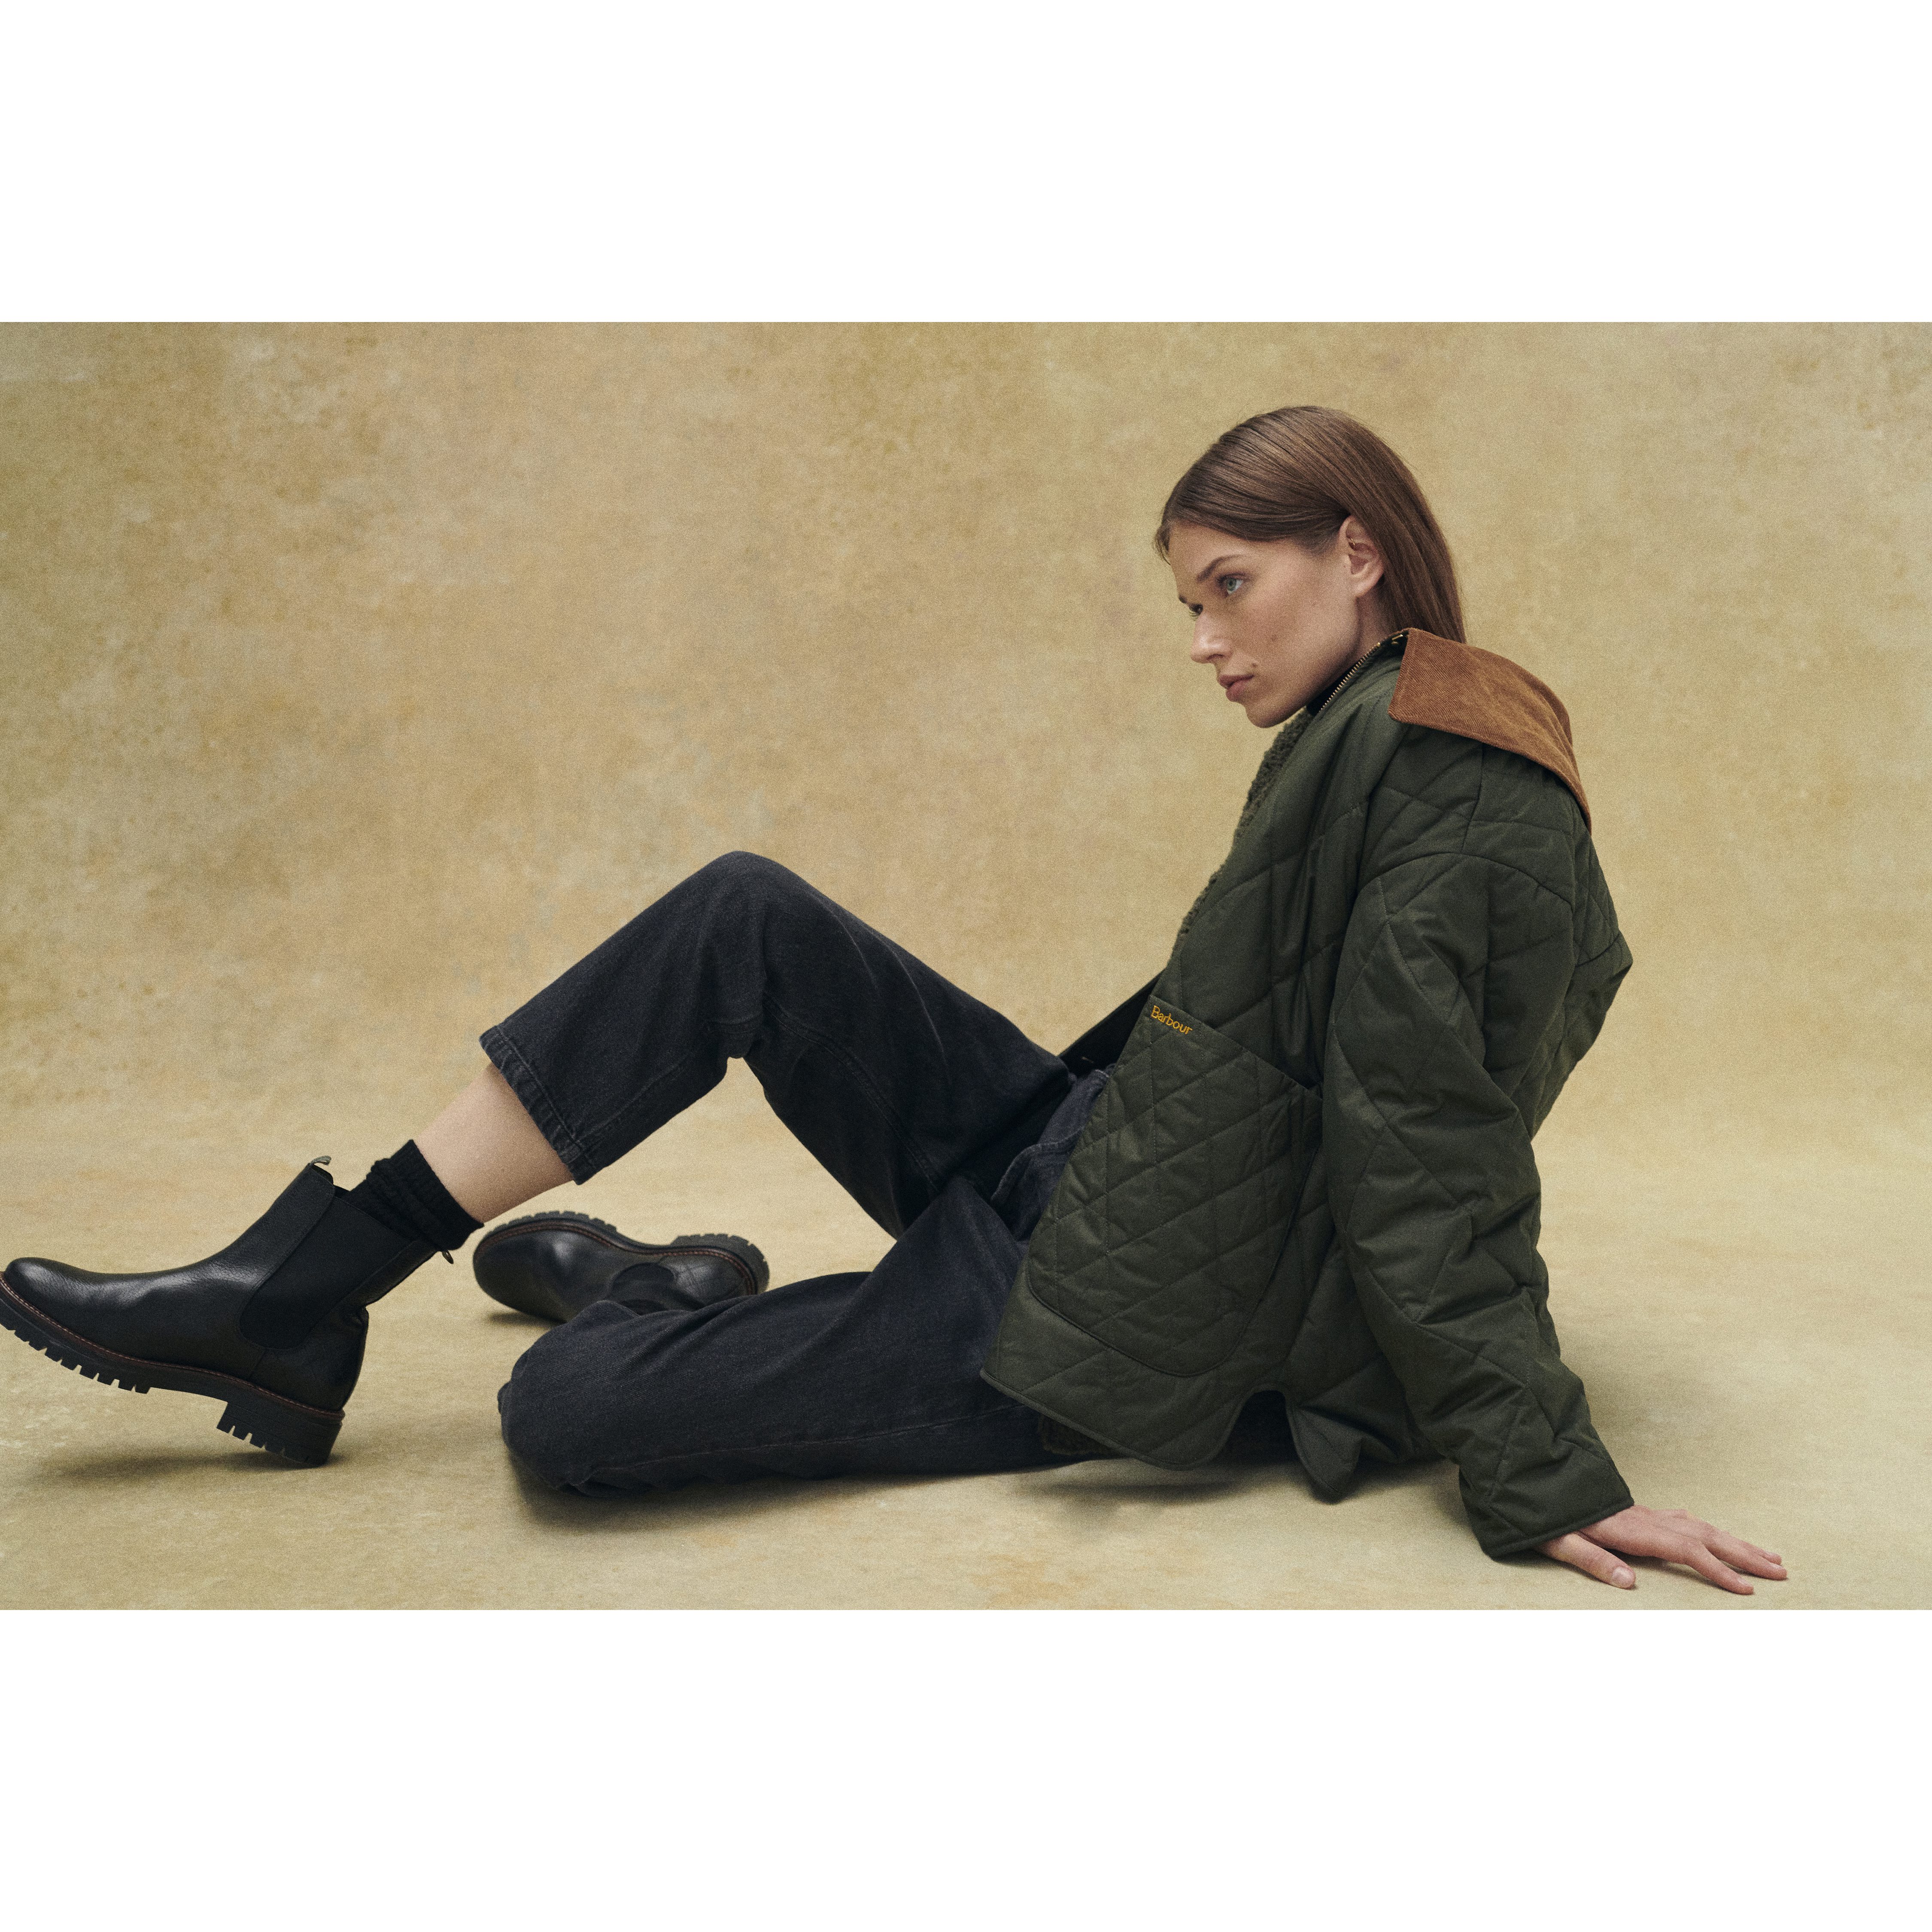 Barbour Women's Woodhall Quilt Jacket - Sage/Ancient | All Apparel 